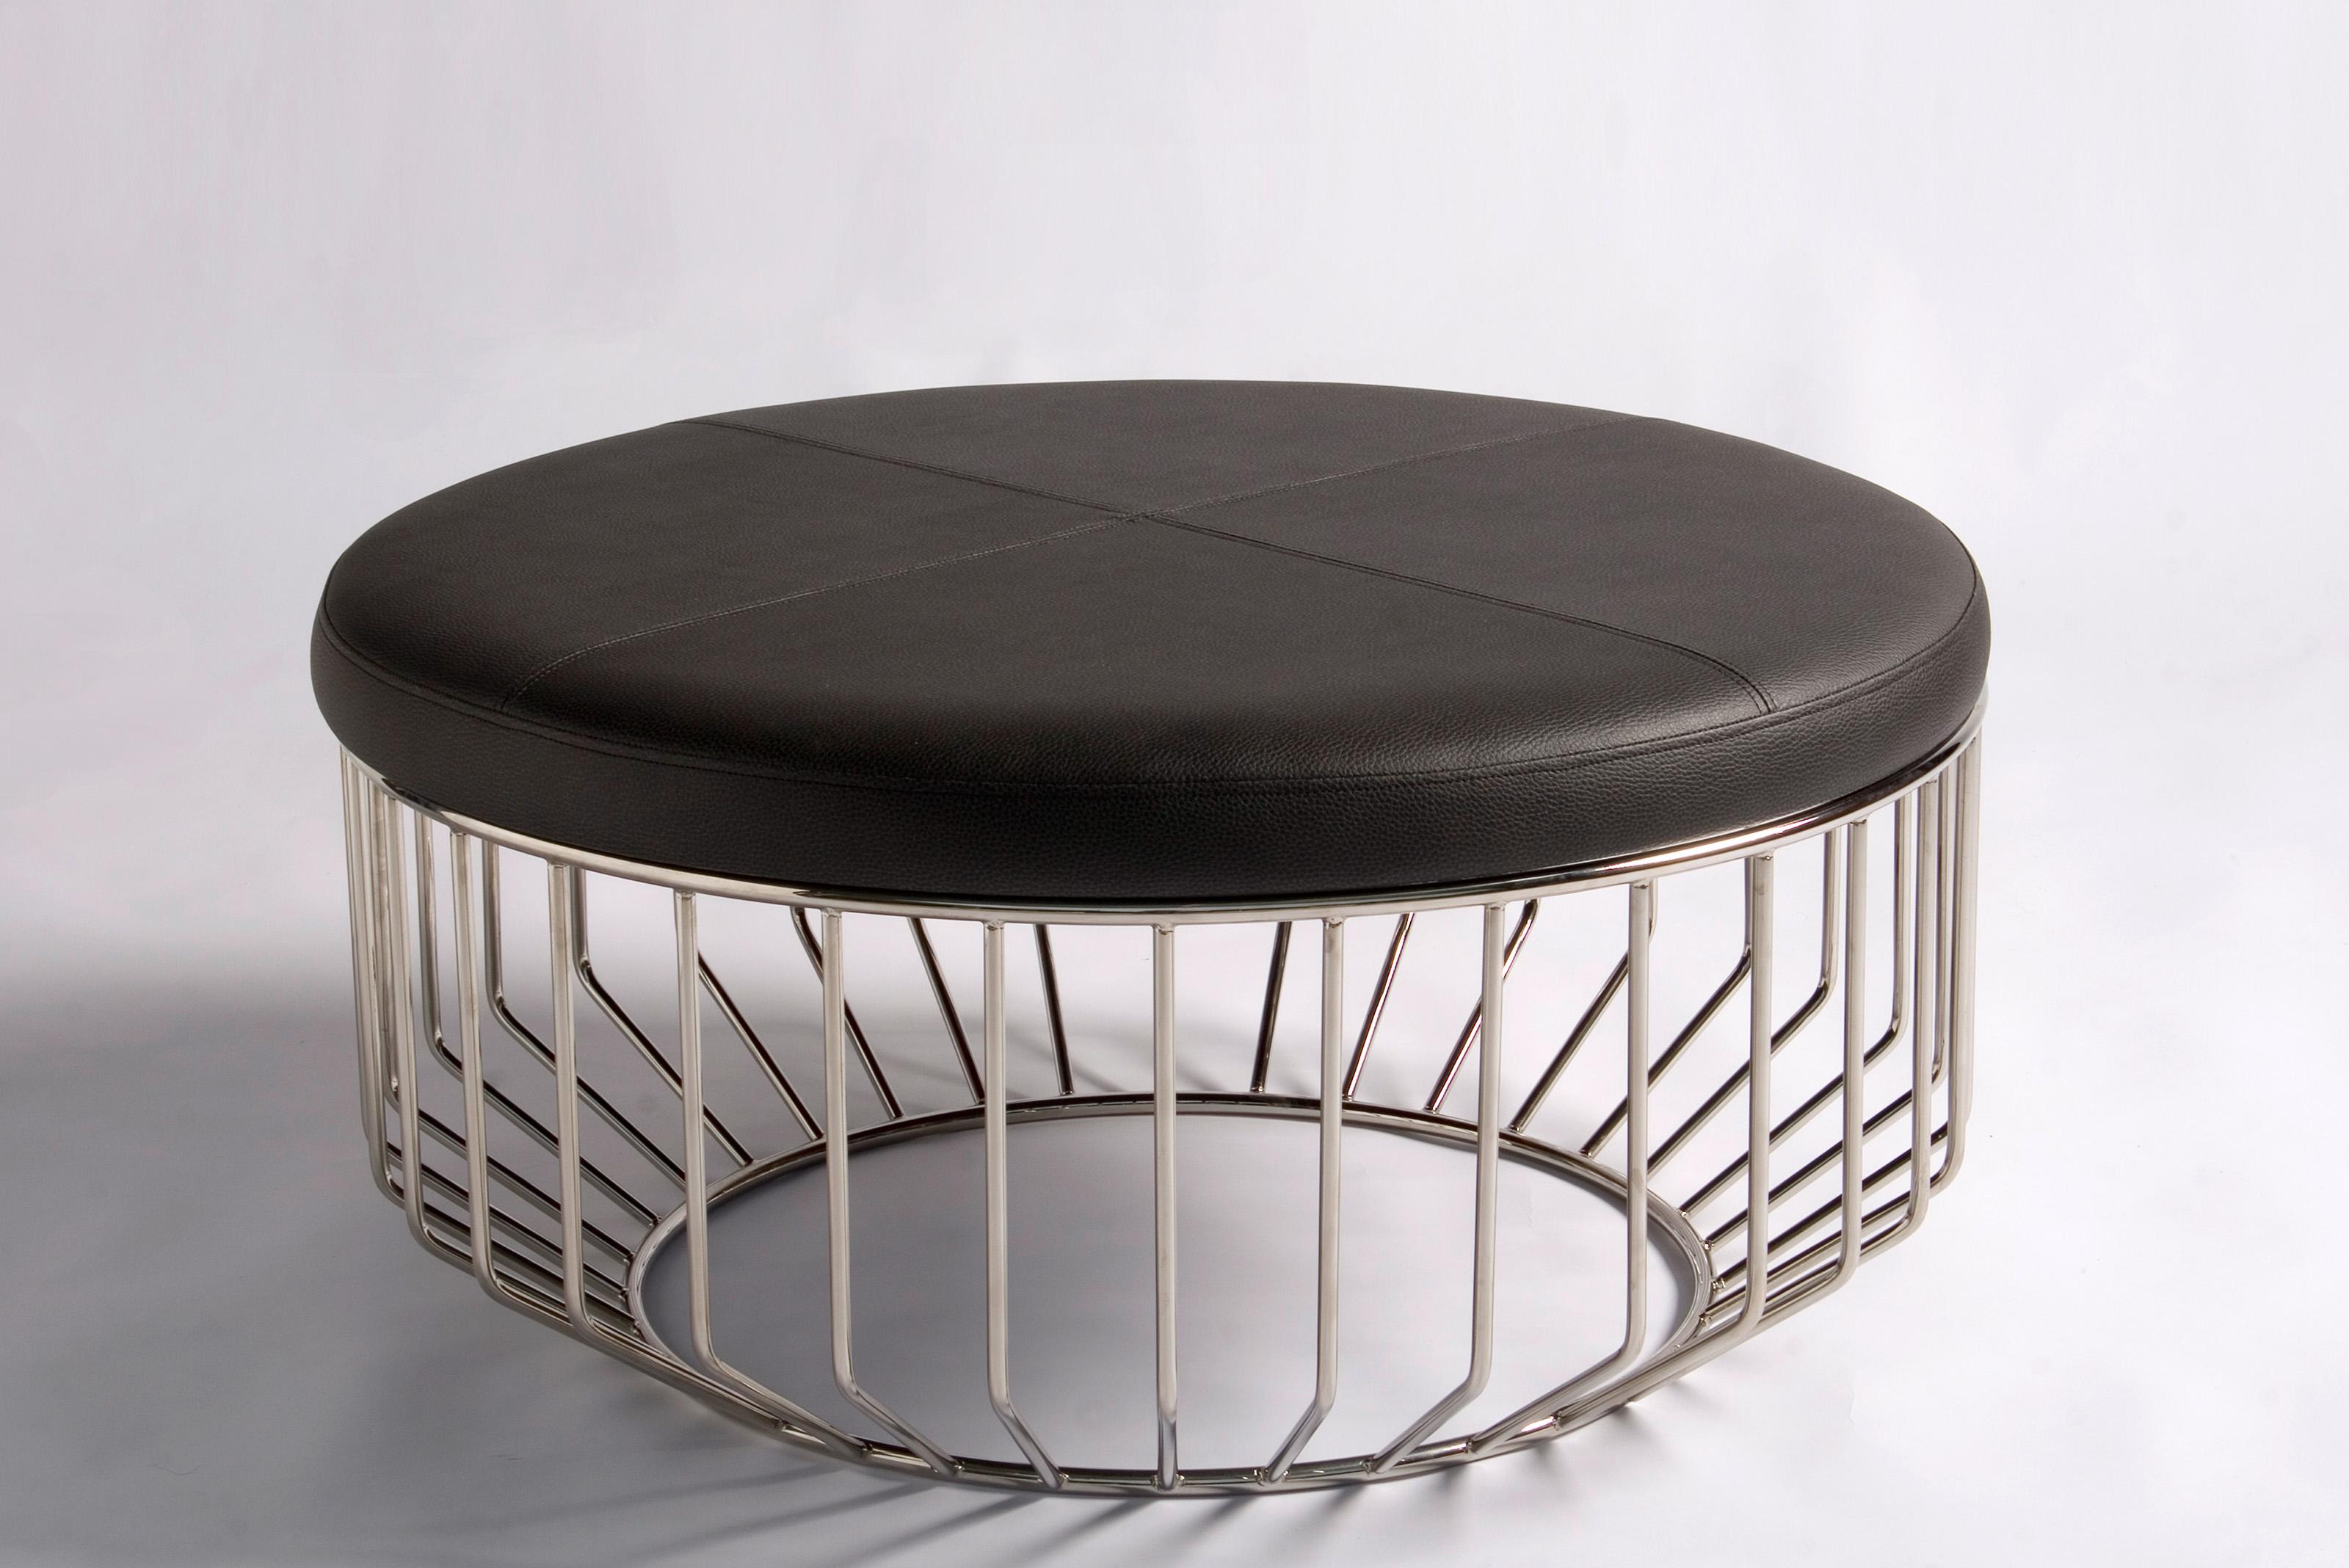 Wired Ottoman by Phase Design
Dimensions: Ø 81.3 x H 38.1  cm. 
Materials: Polished chrome and leather.

Solid steel bar with upholstered tops. Steel available in gloss or flat black and white, polished chrome, burnt copper, or smoked brass finish.